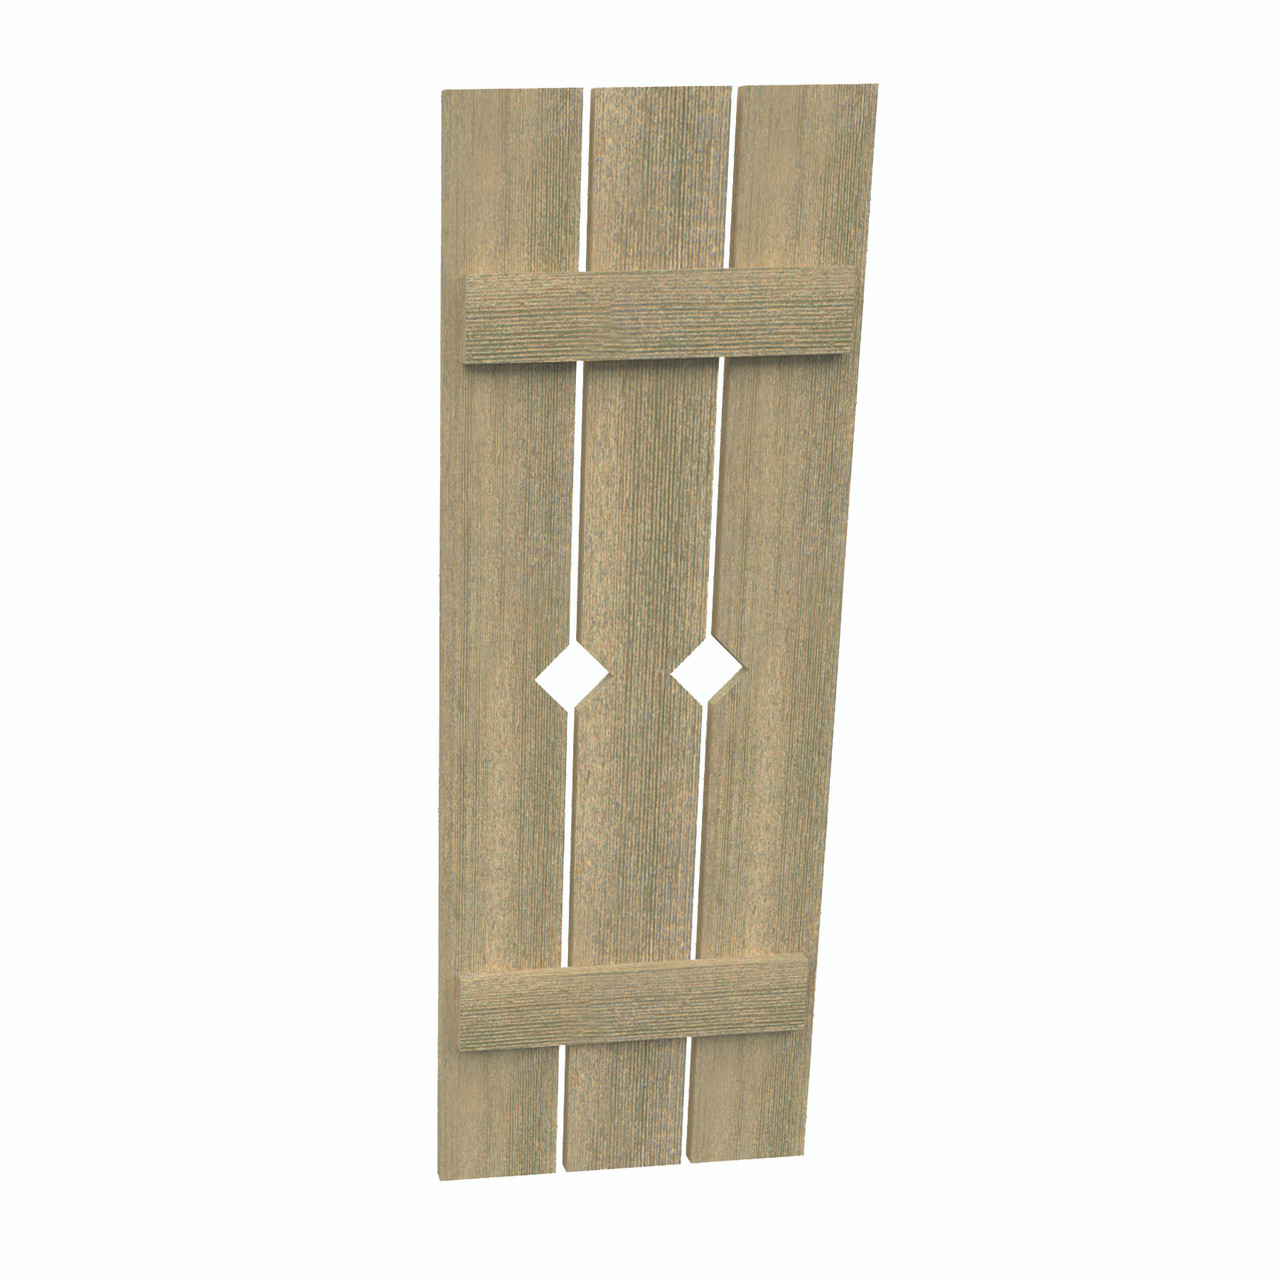 18 inch by 120 inch Plank Shutter with 3-Plank, Diamond